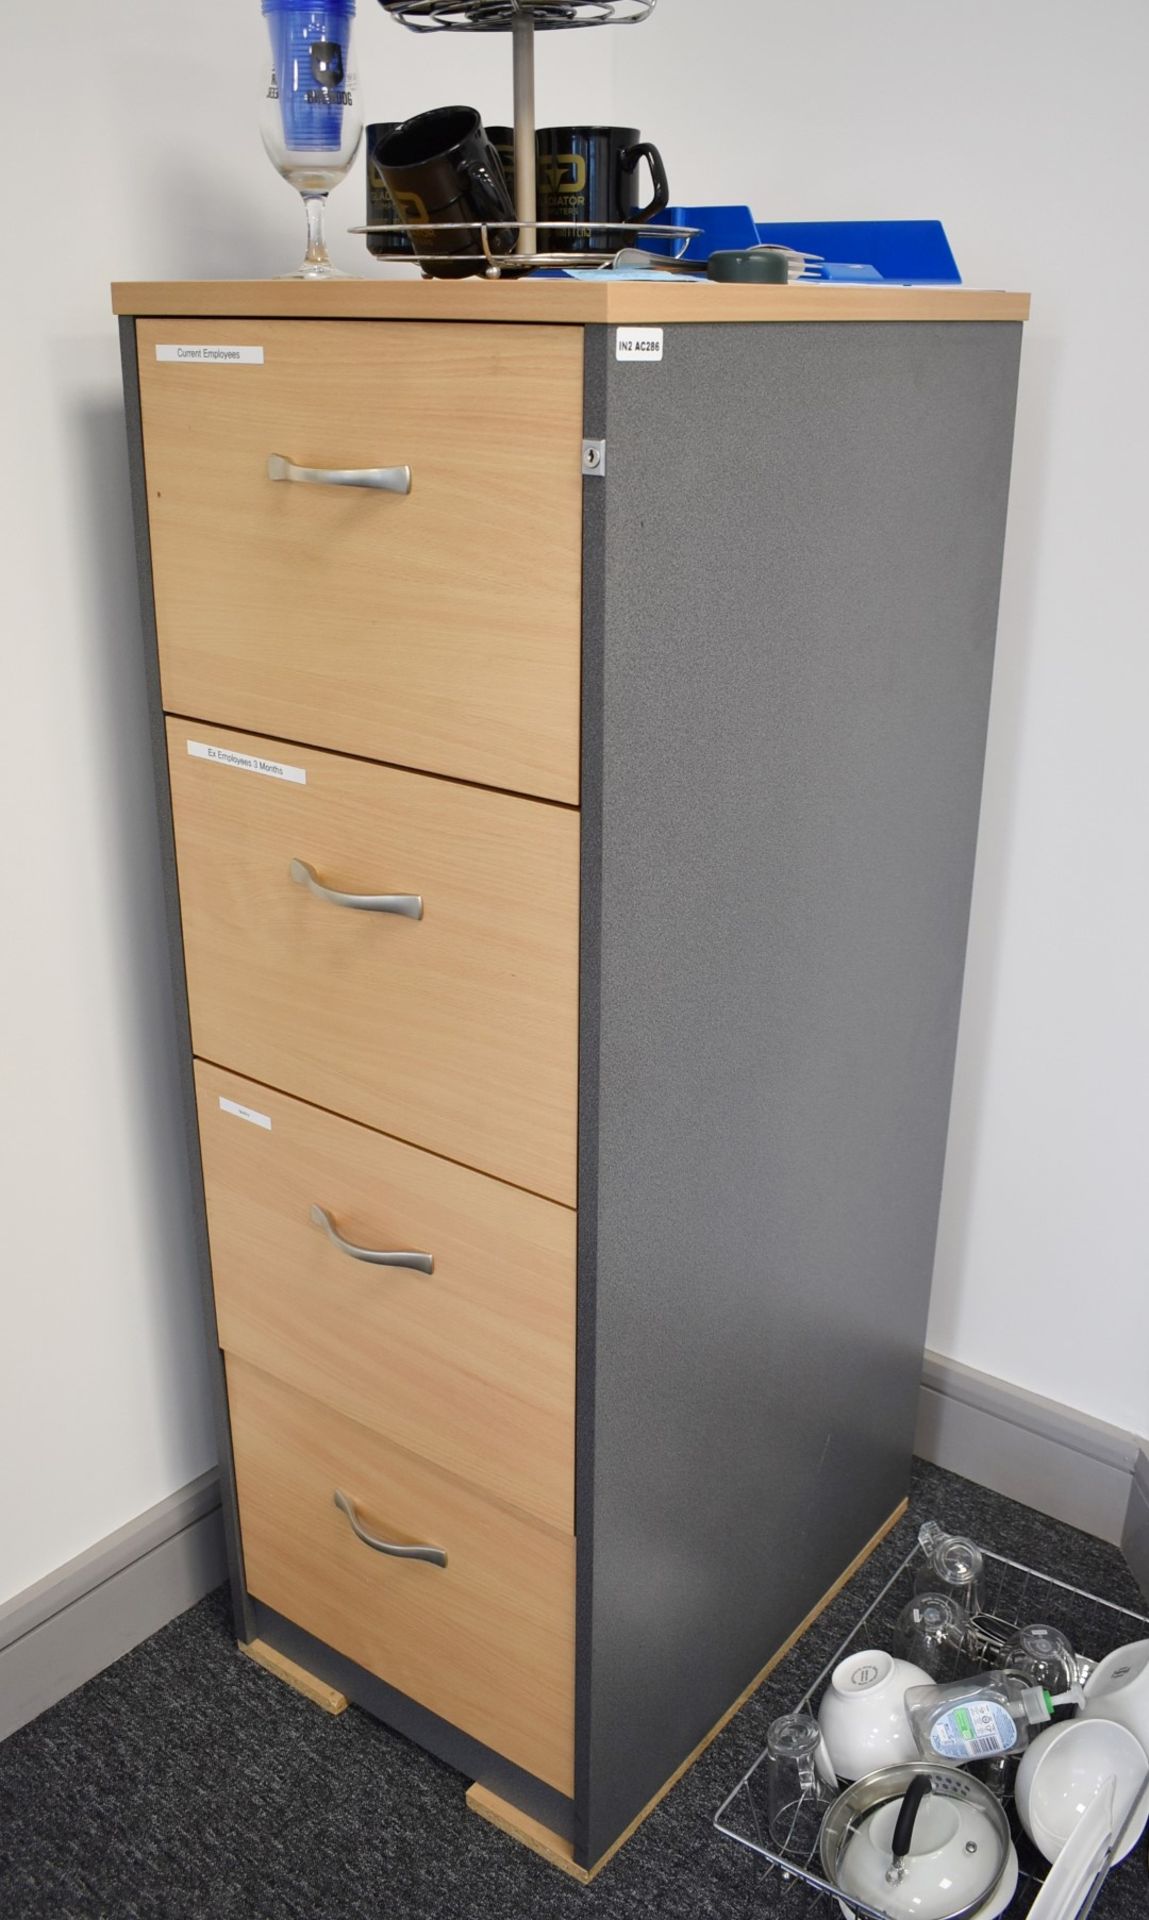 1 x Four Drawer Office Filing Cabinet - Includes Key - Ref: AC286 1FMO - CL646 - Location: